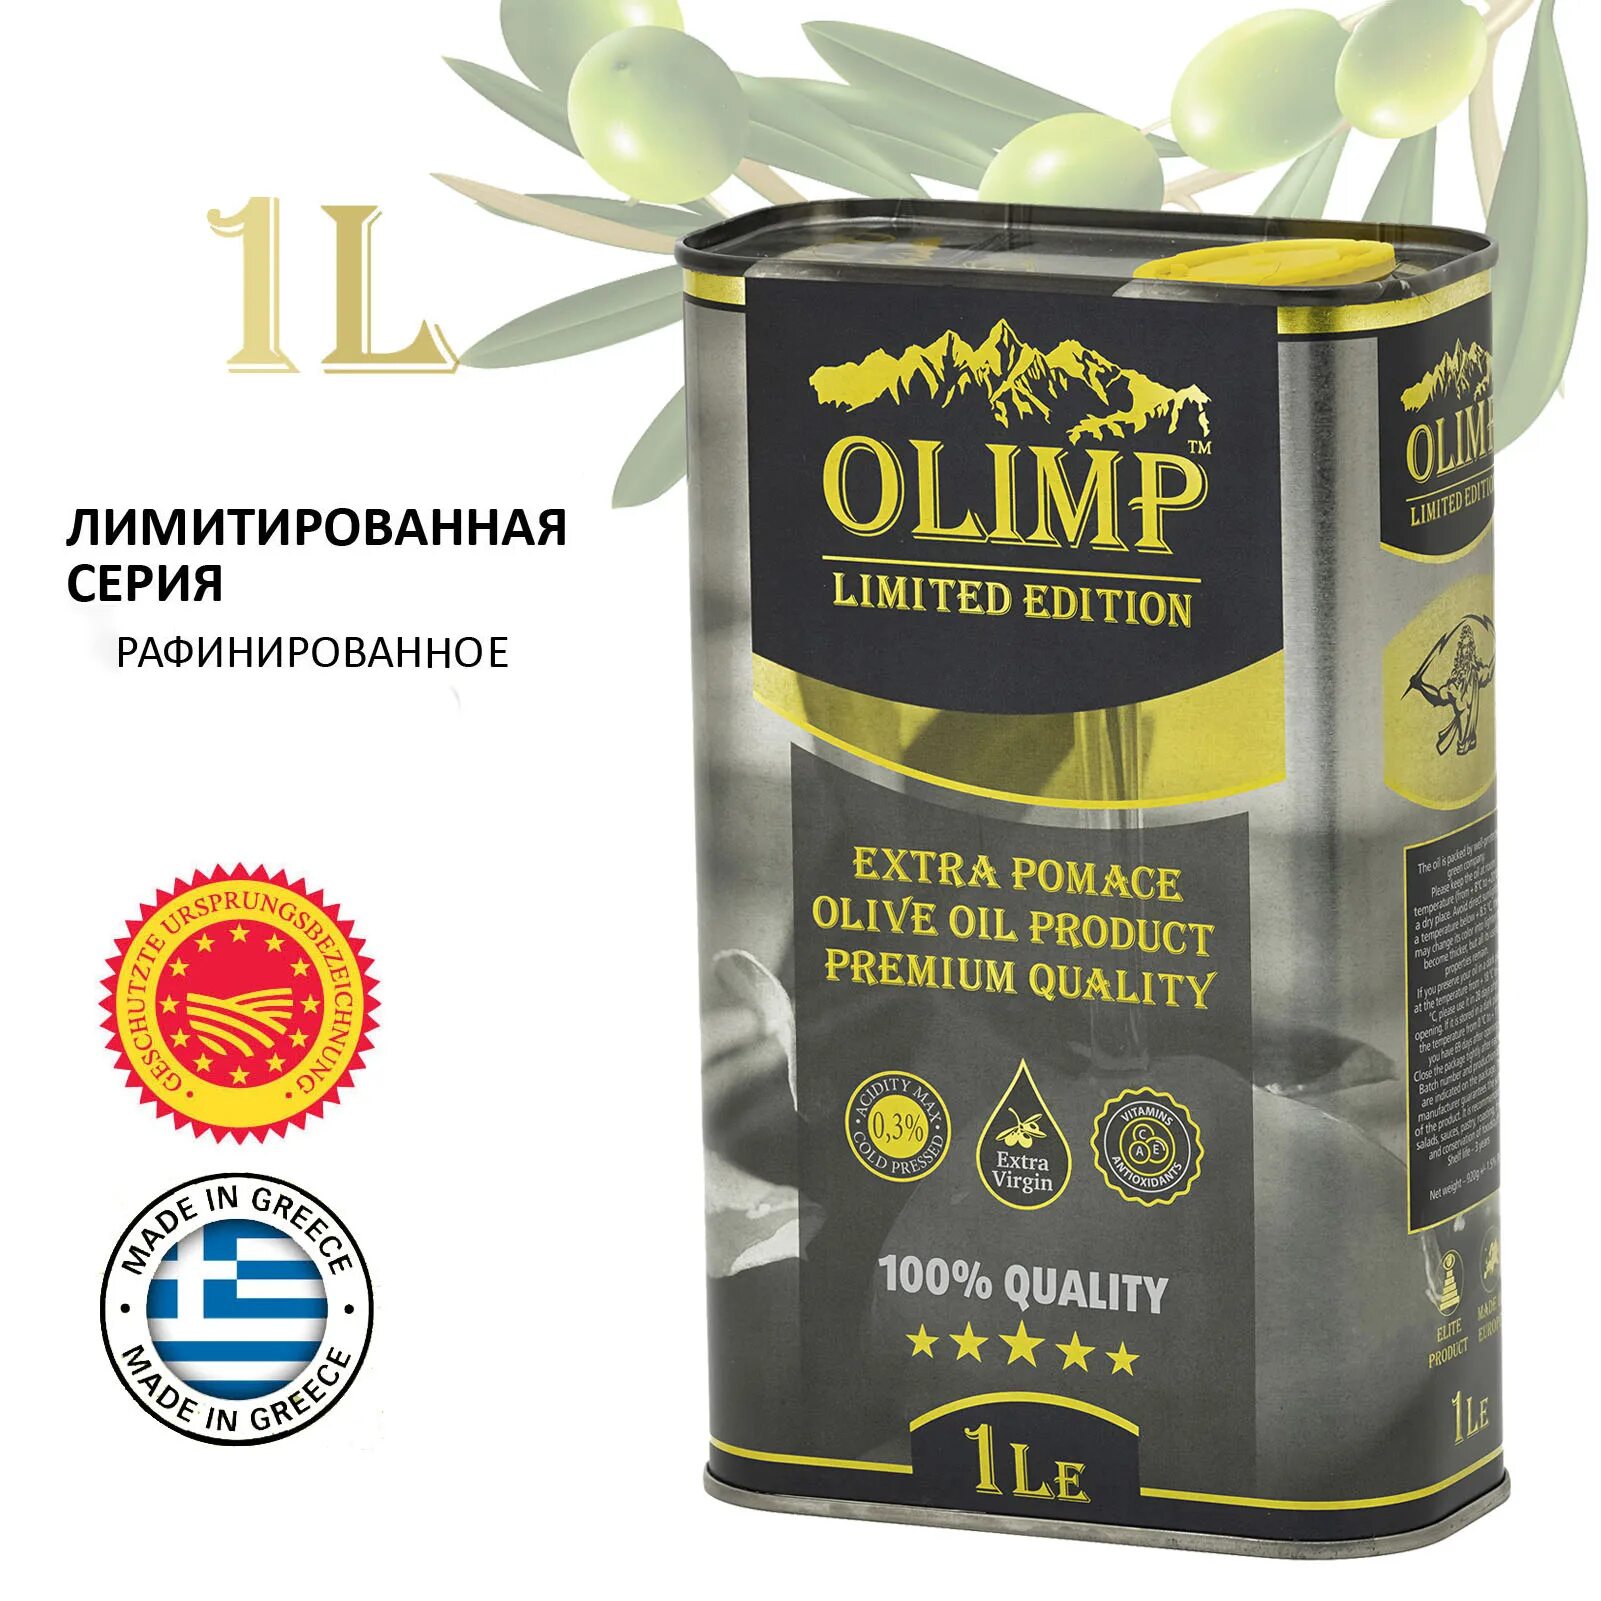 Olimp Limited Edition масло оливковое. Оливковое масло Олимп Экстра. Olimp authentic Greek масло оливковое. Оливковое масло жб Olimp.